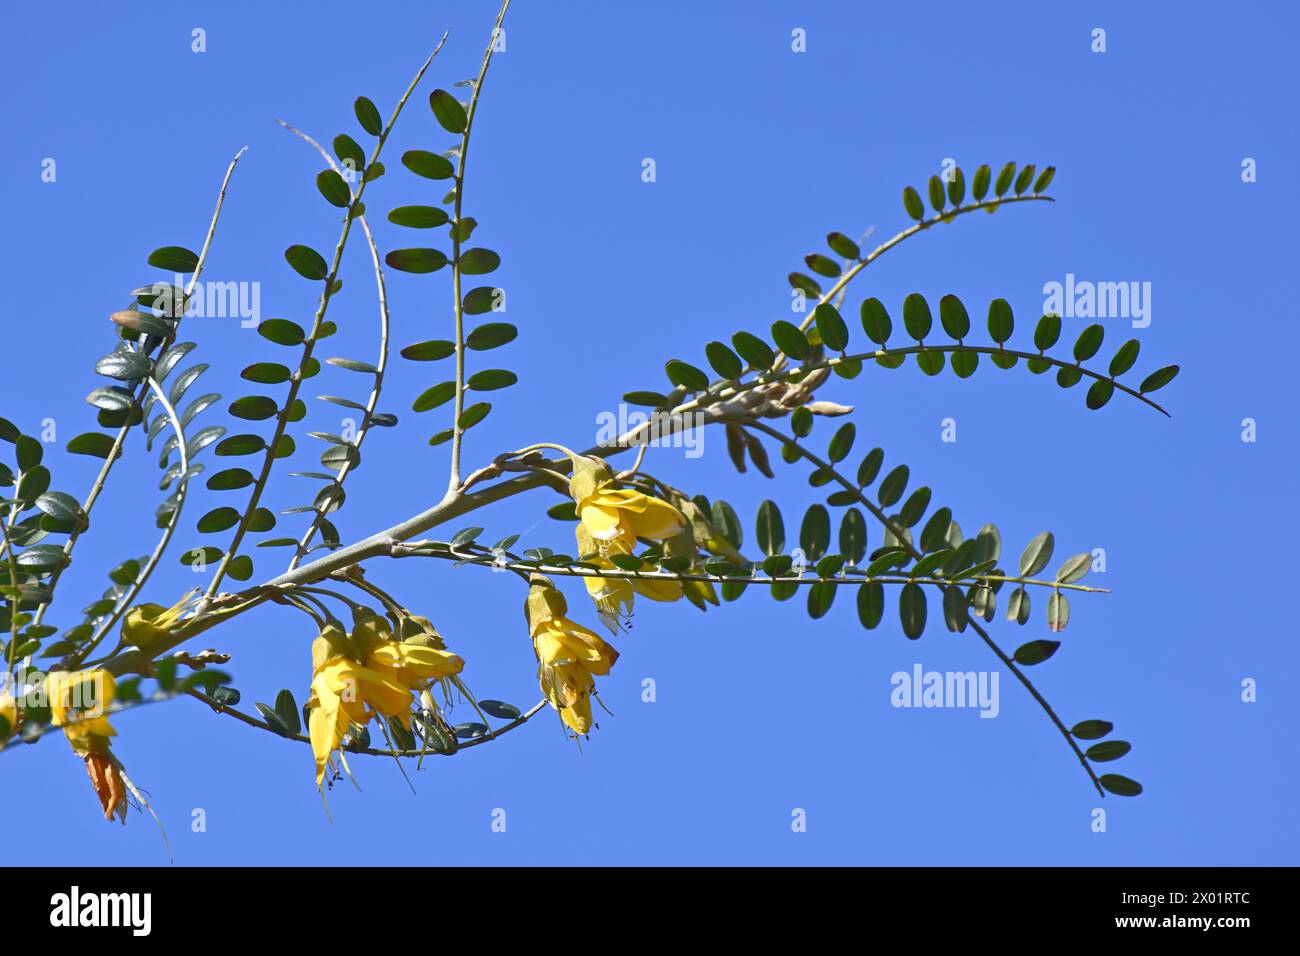 Bright yellow spring flowers of evergreen shrub Kōwhai also known as Sophora microphylla growing against clear blue sky in UK garden March Stock Photo